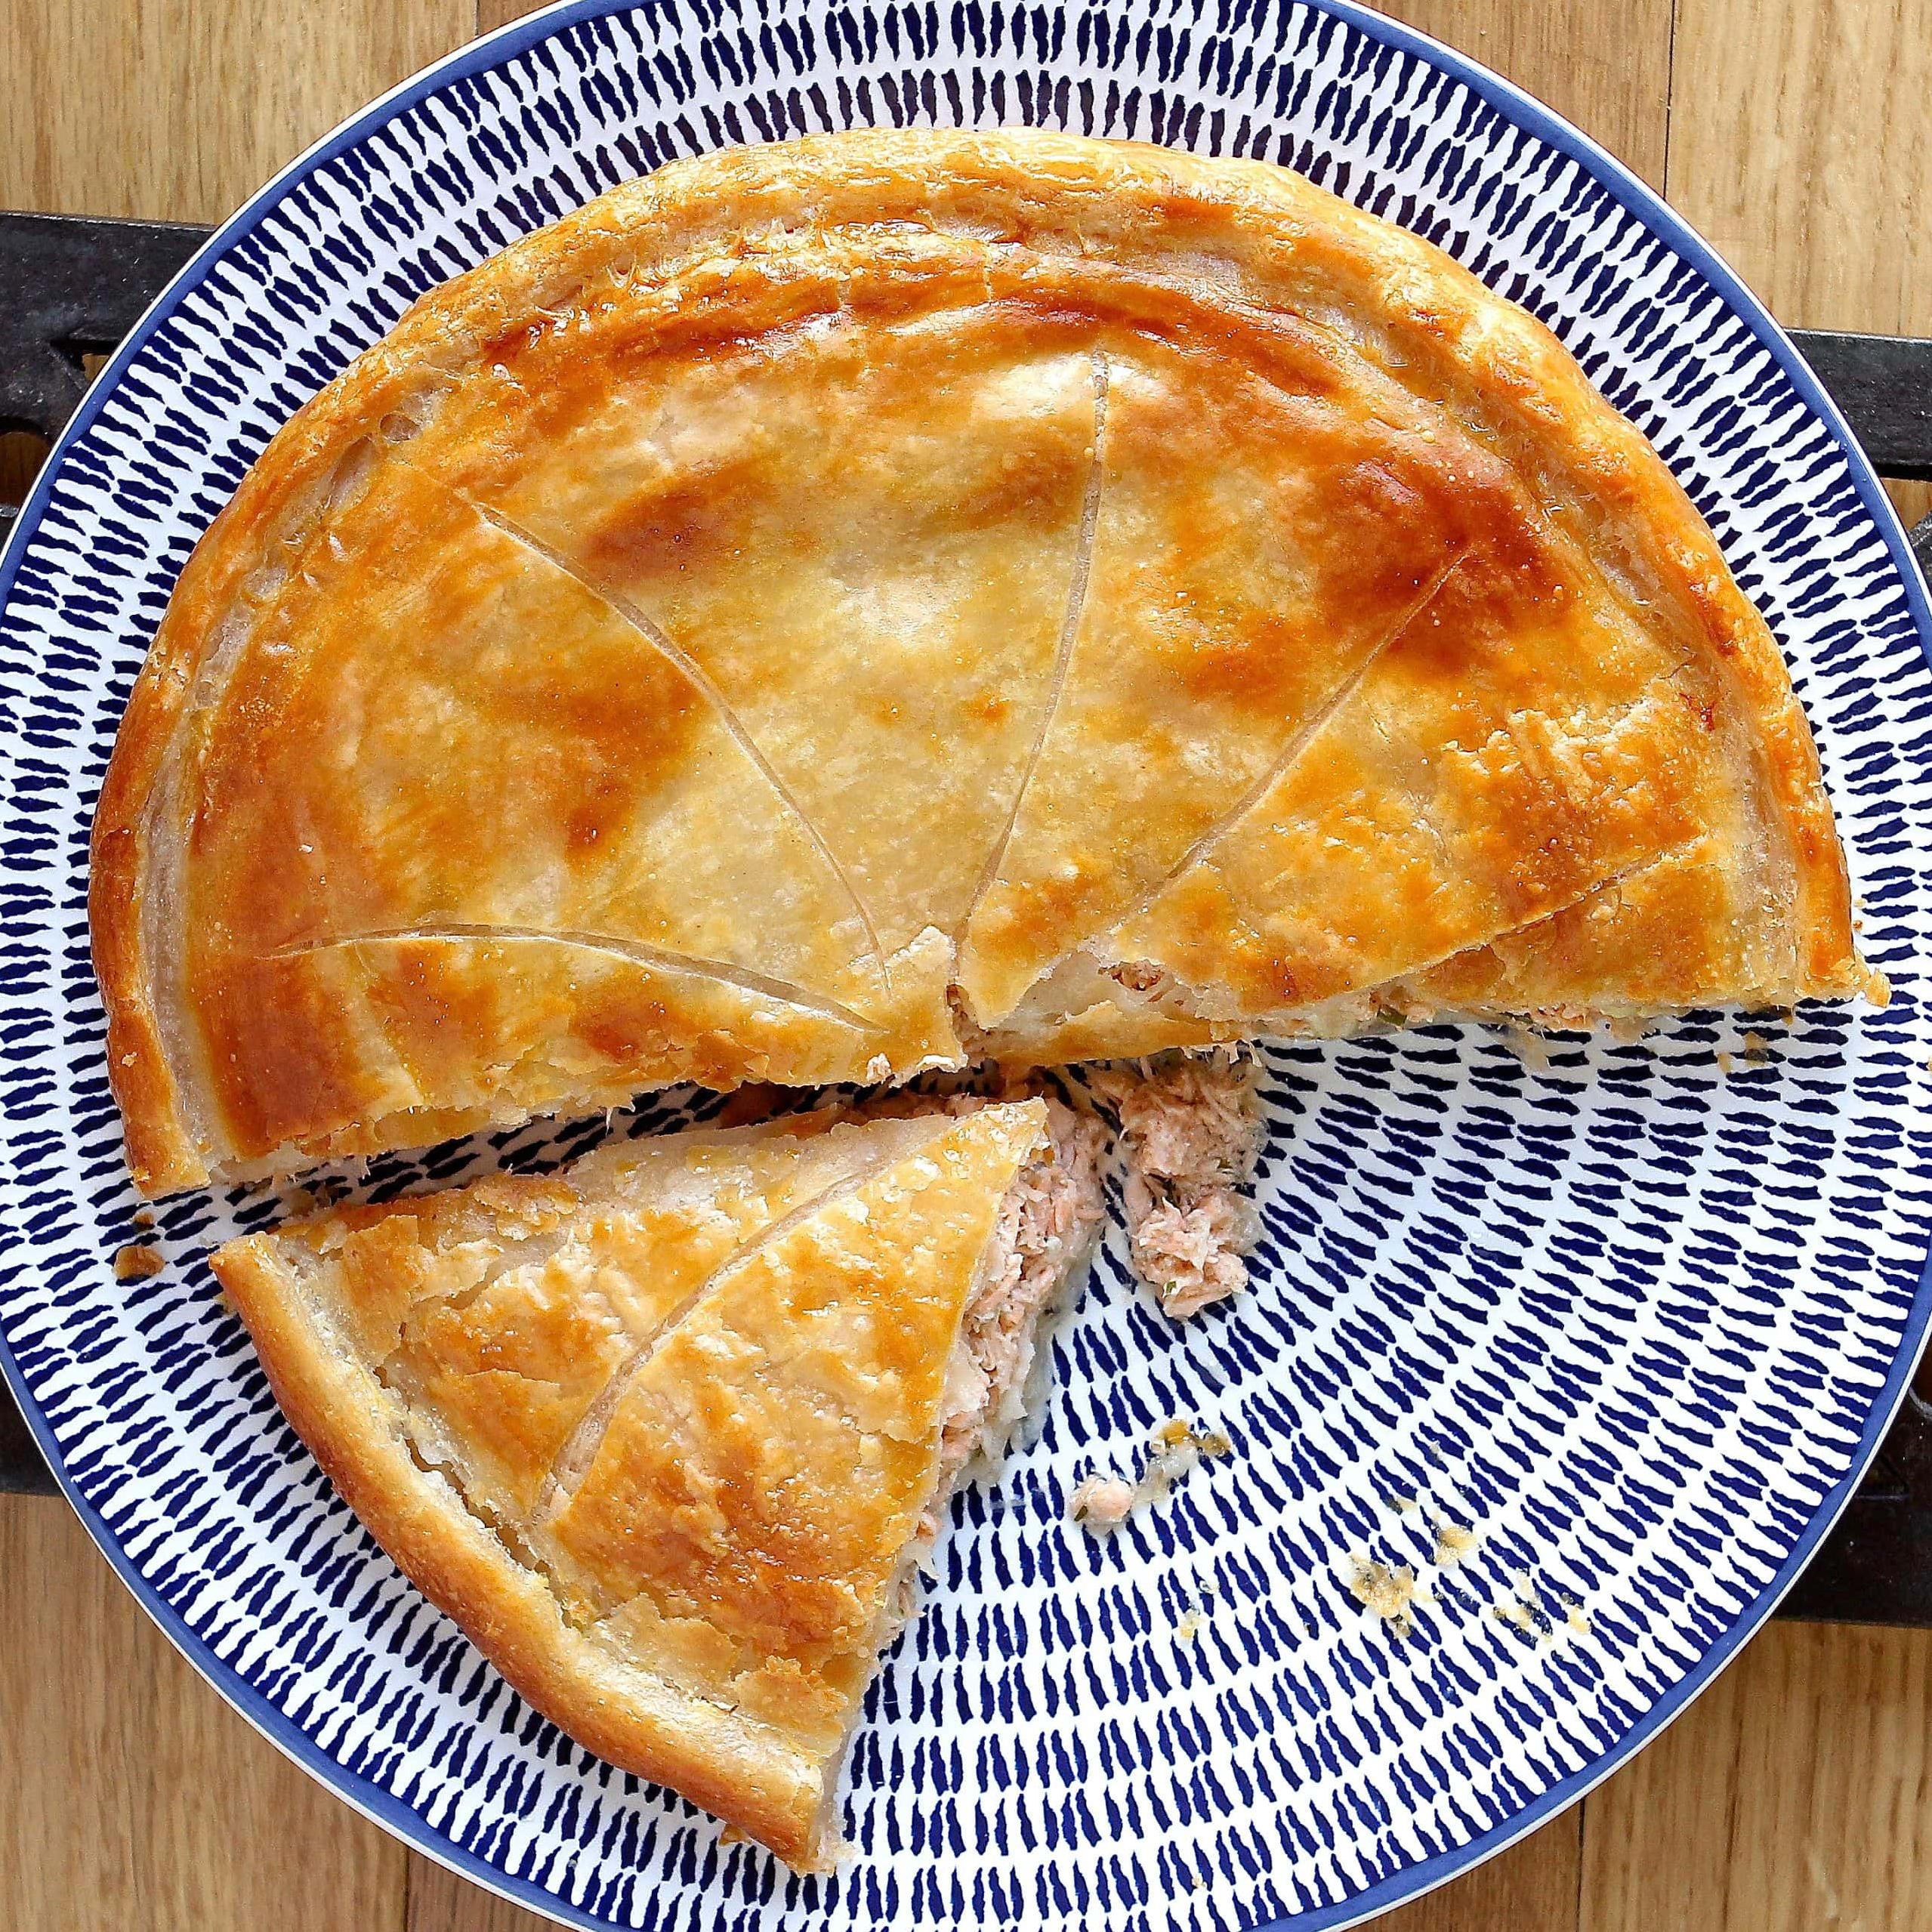  This impossible pie is very possible and very delicious.